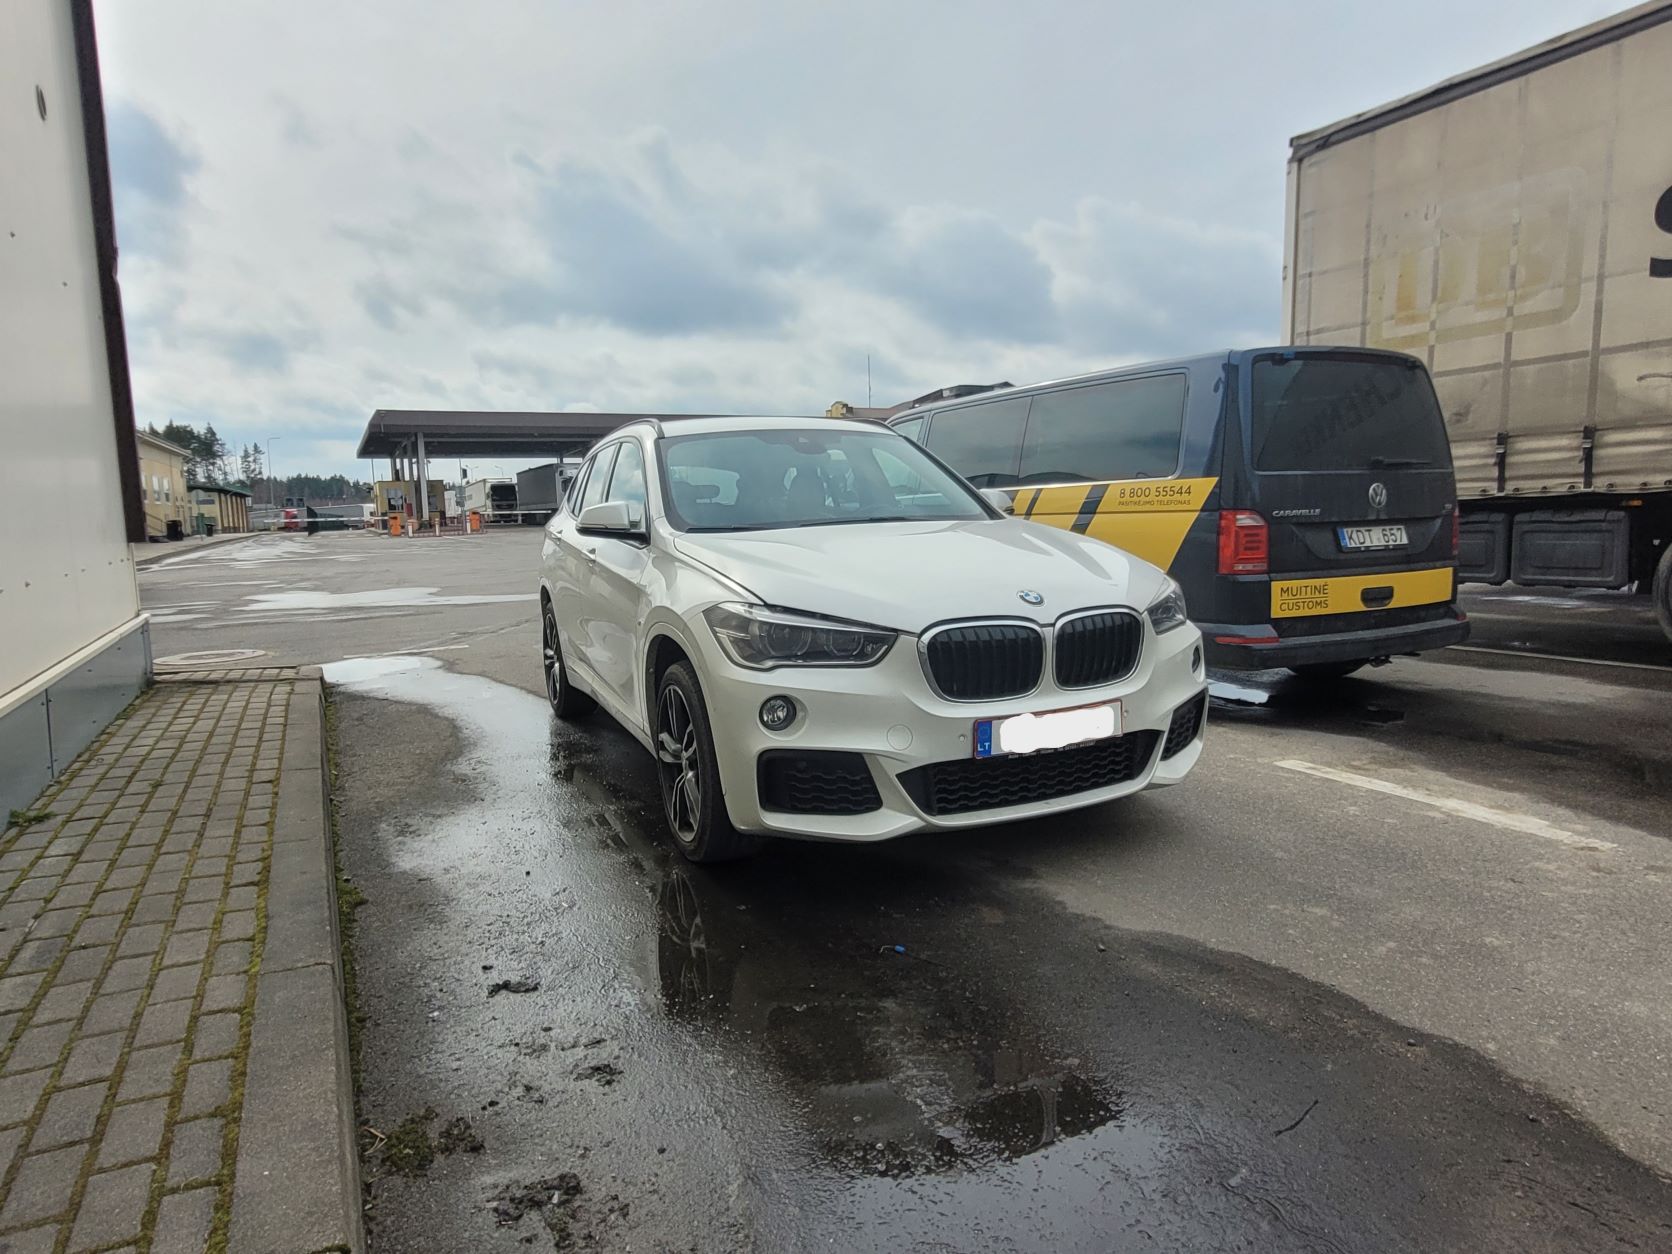 THE BMW CAR SEIZED AT THE BORDER